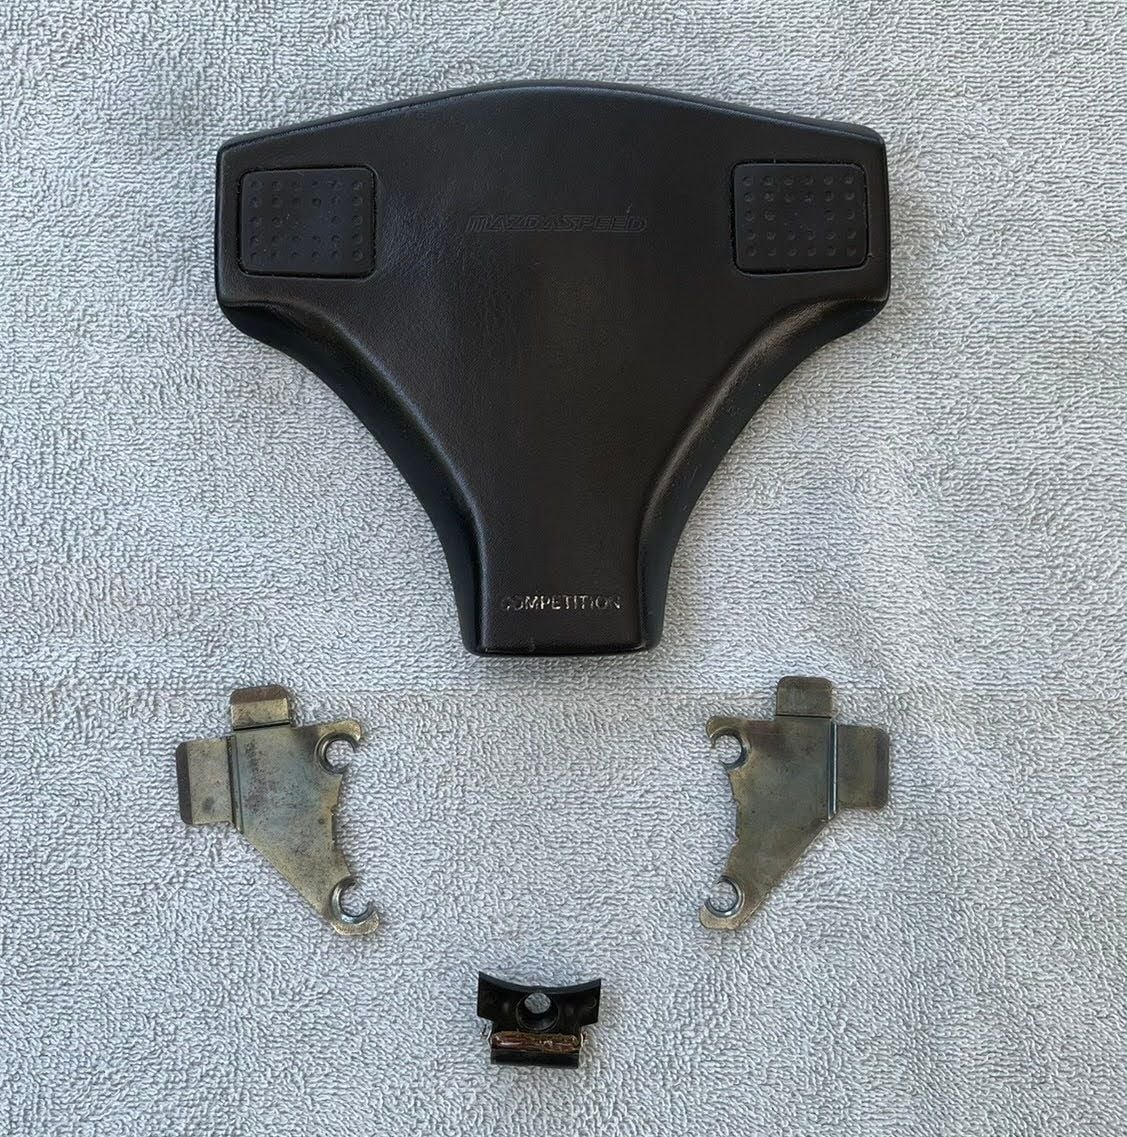 Accessories - Old School 80's Mazdaspeed Horn Pad - Used - All Years Any Make All Models - San Jose, CA 95111, United States